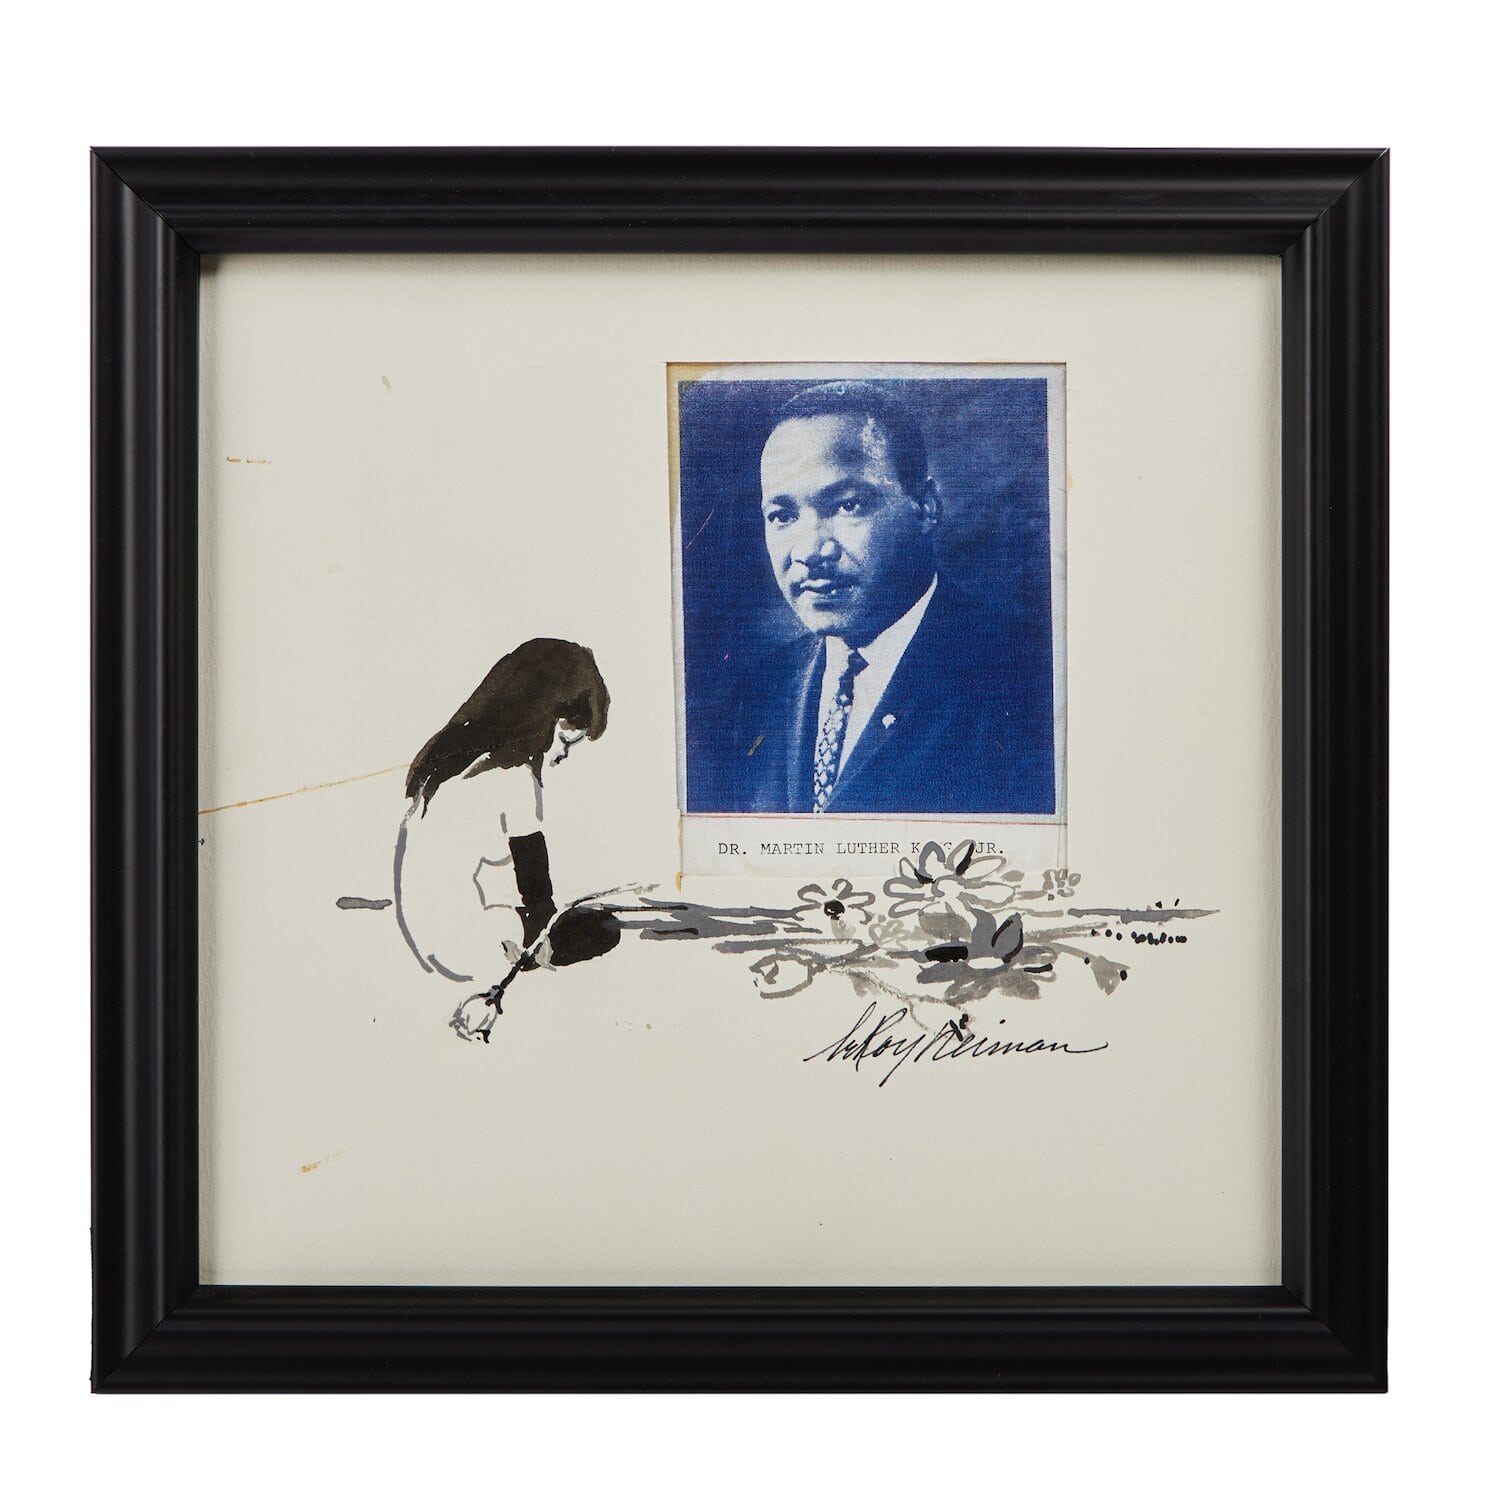 One of Hefner’s LeRoy Neiman pieces featuring Femlin grieving before a photograph of Martin Luther King, Jr.